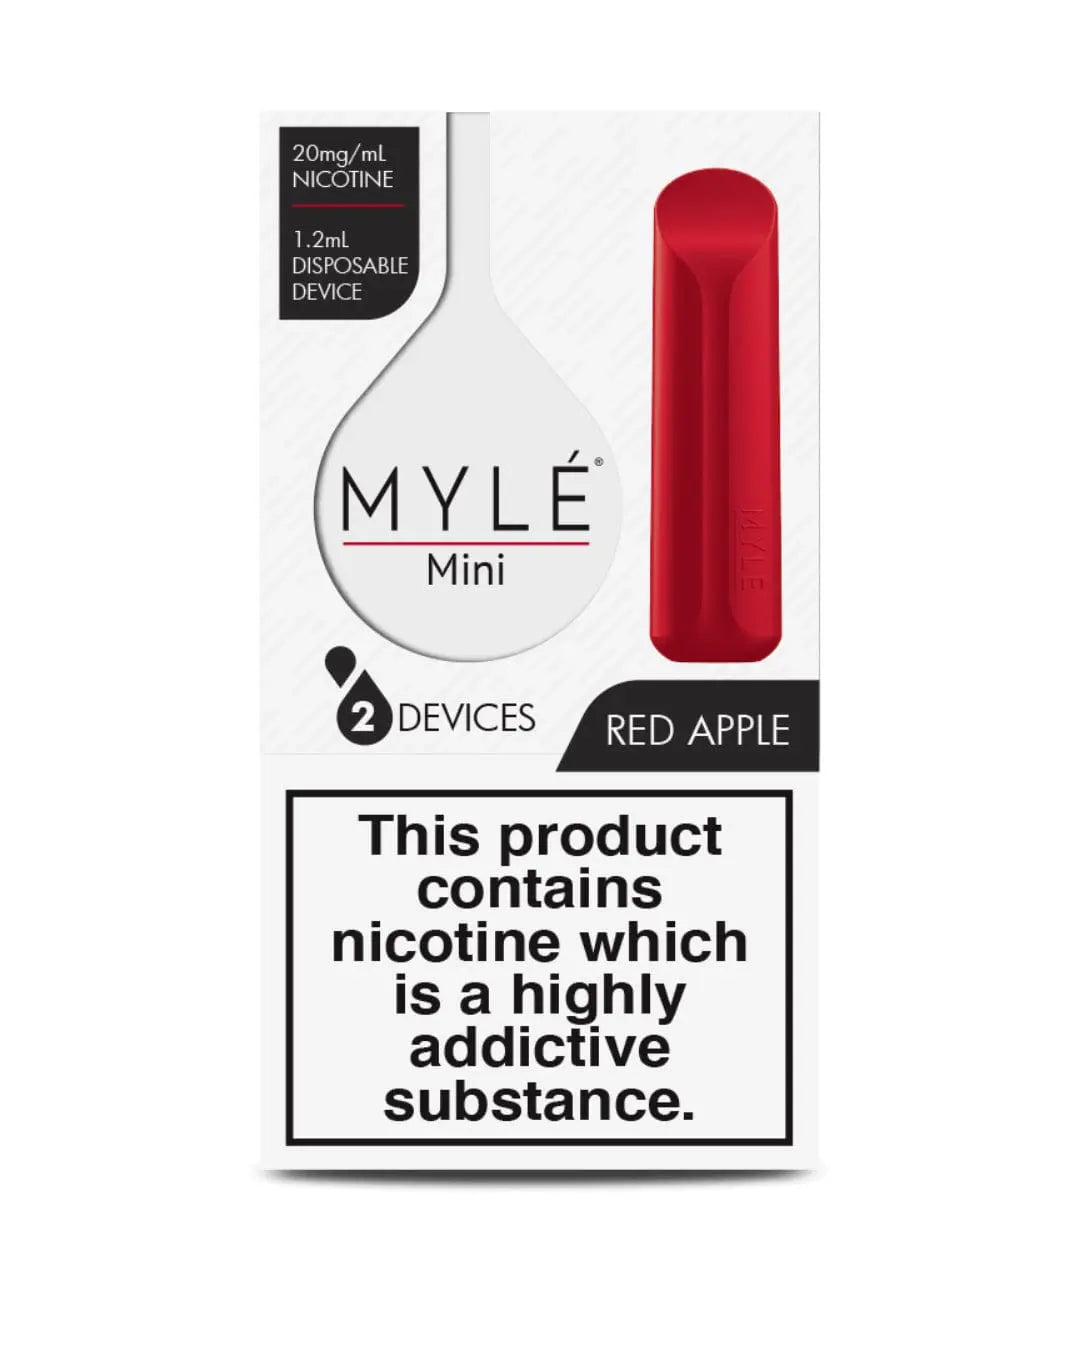 Red Apple - Mini Myle - Pack of 2 Devices Disposable Vapes